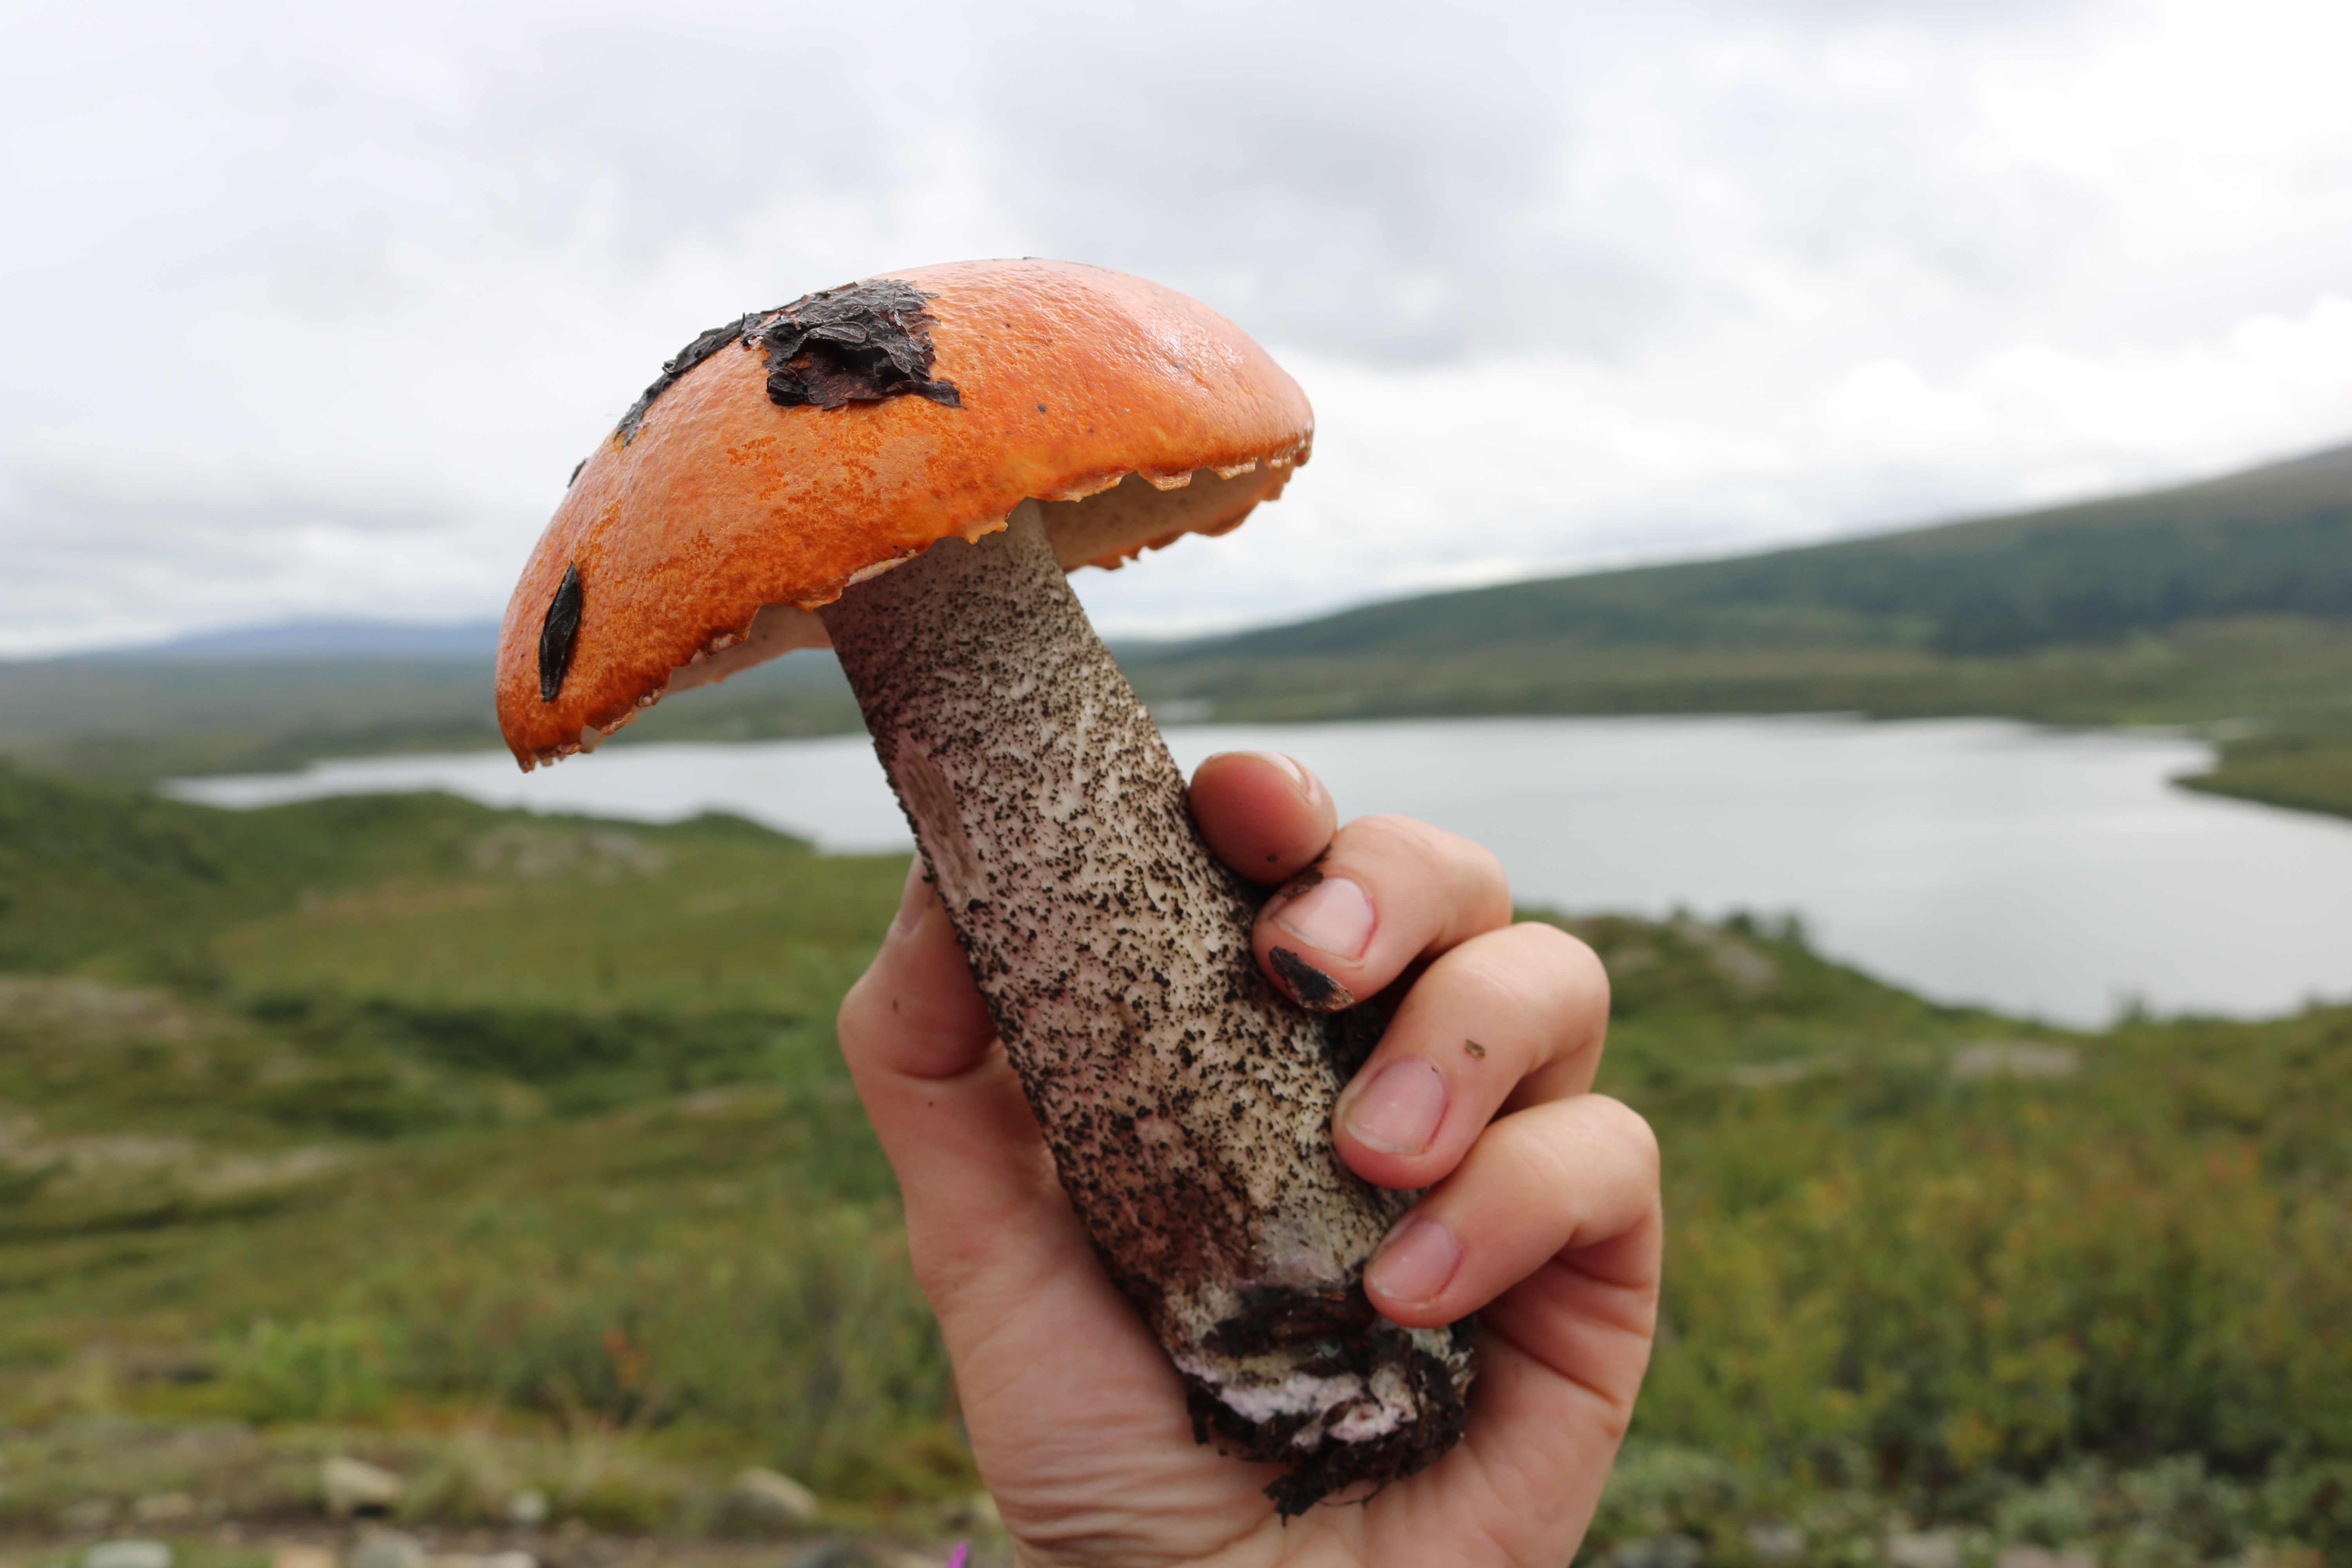 Orange capped mushroom with a spongy underside on a speckled stalk held by a hand against a tundra landscape with a lake